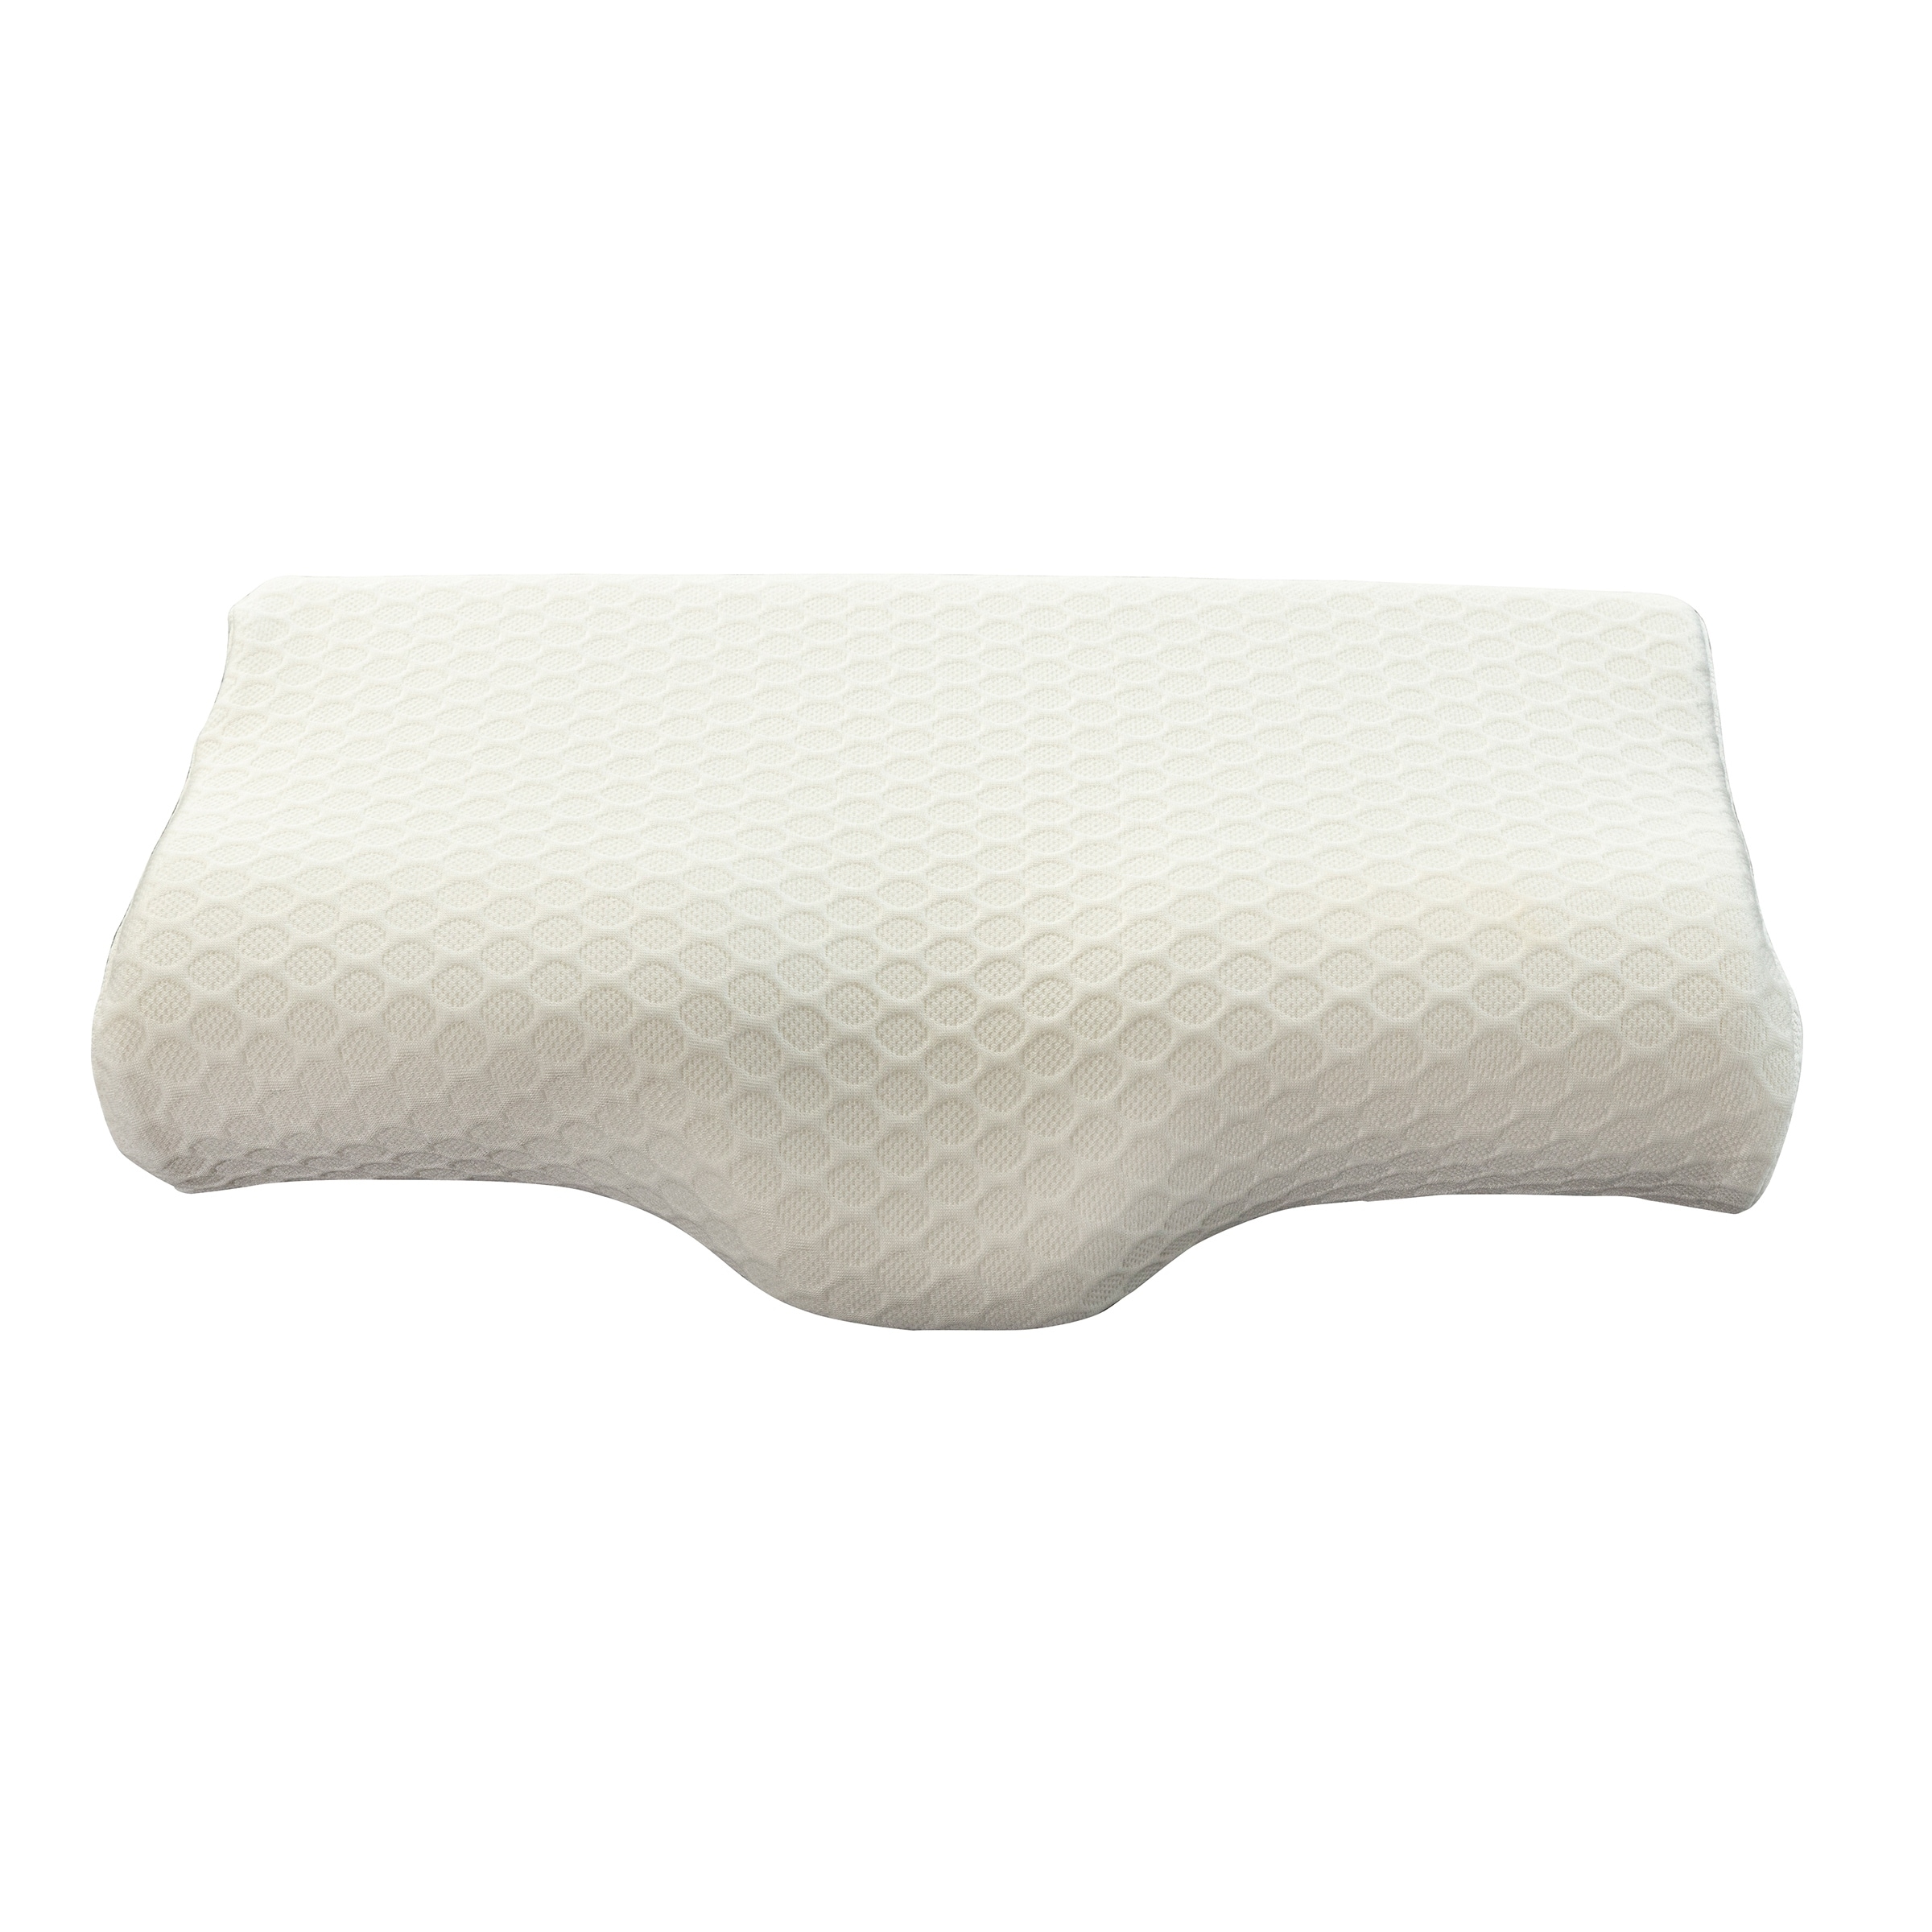 Cervical Pillow - Memory Foam Neck Pillow with Washable Cover - Contour  Pillows by Home-Complete - White - On Sale - Bed Bath & Beyond - 36578917